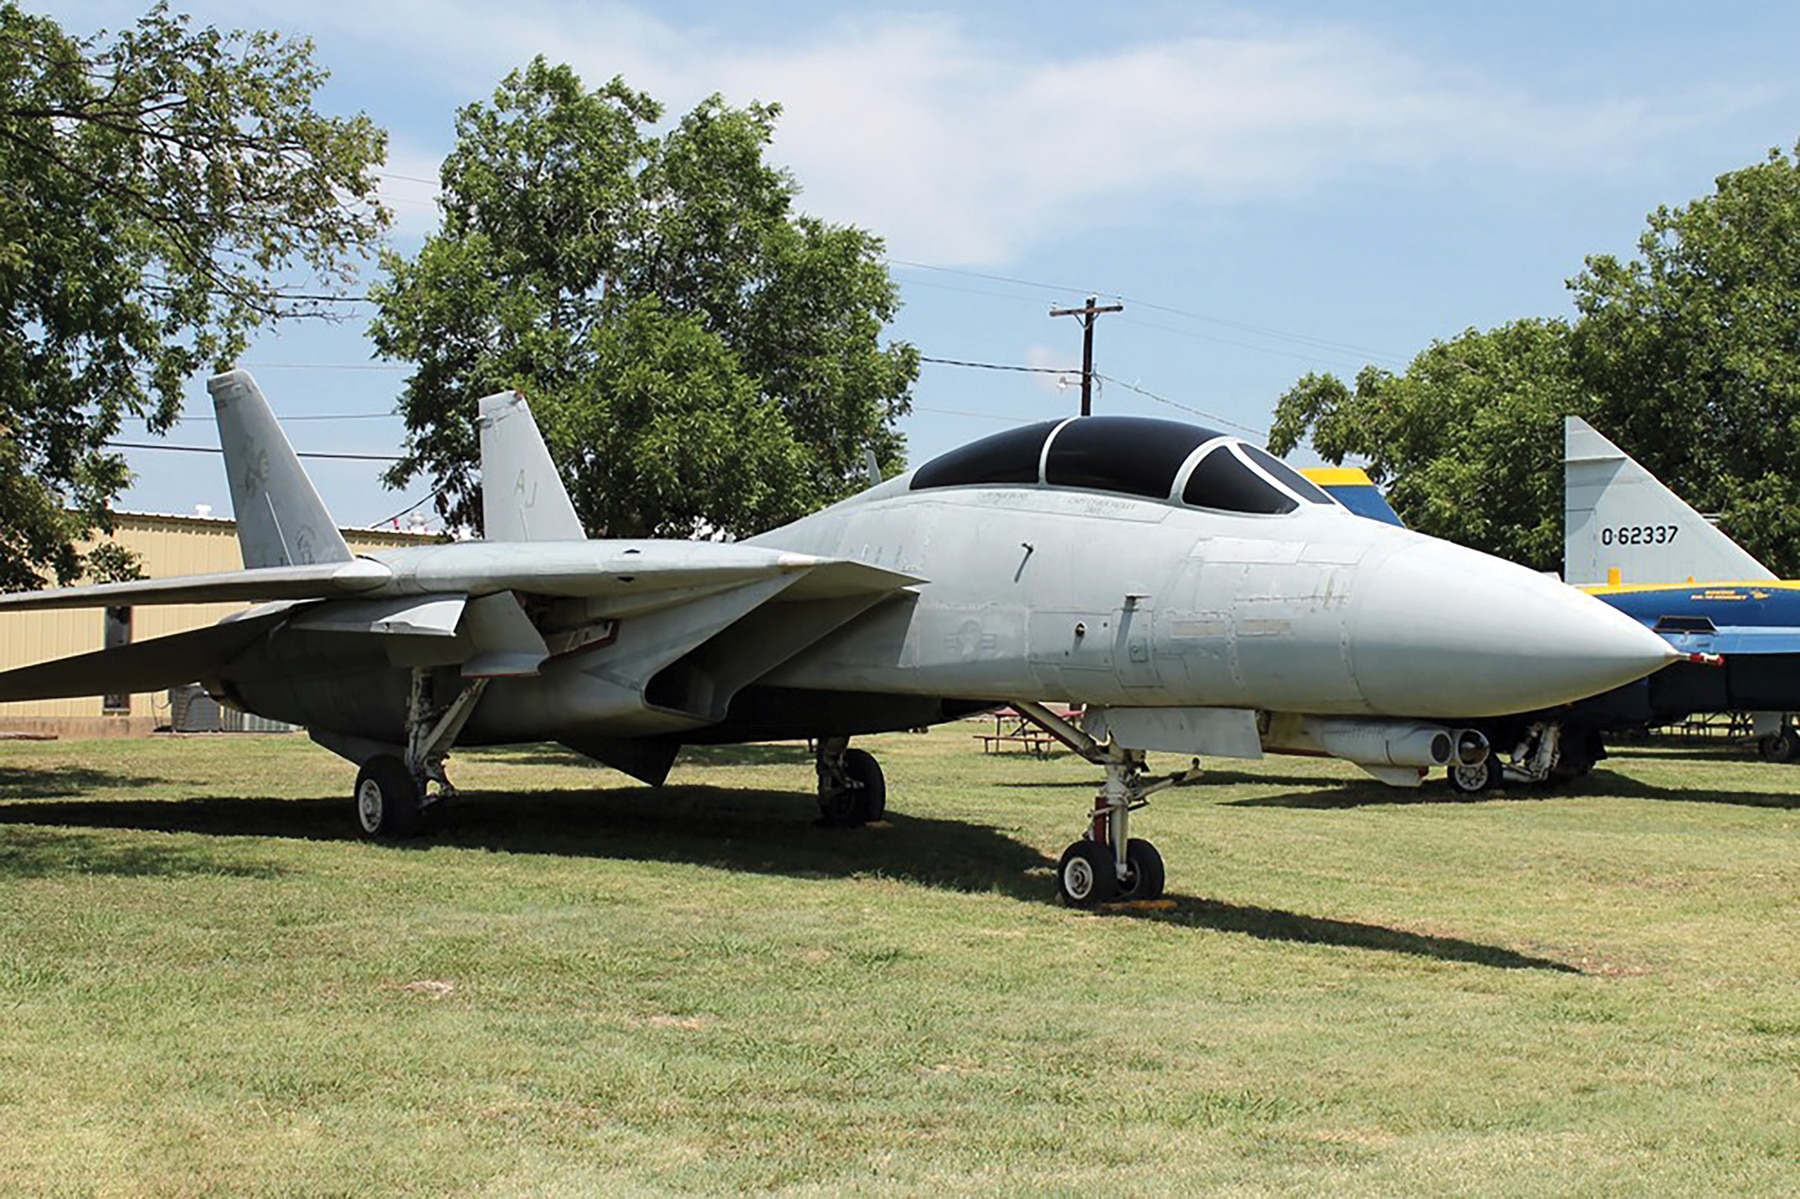 TOP GUN Perhaps the most widely recognized Navy fighter, thanks to its starring role in Top Gun, the F-14 Tomcat served as an advanced interceptor and air superiority fighter. | Courtesy Fort Worth Aviation Museum